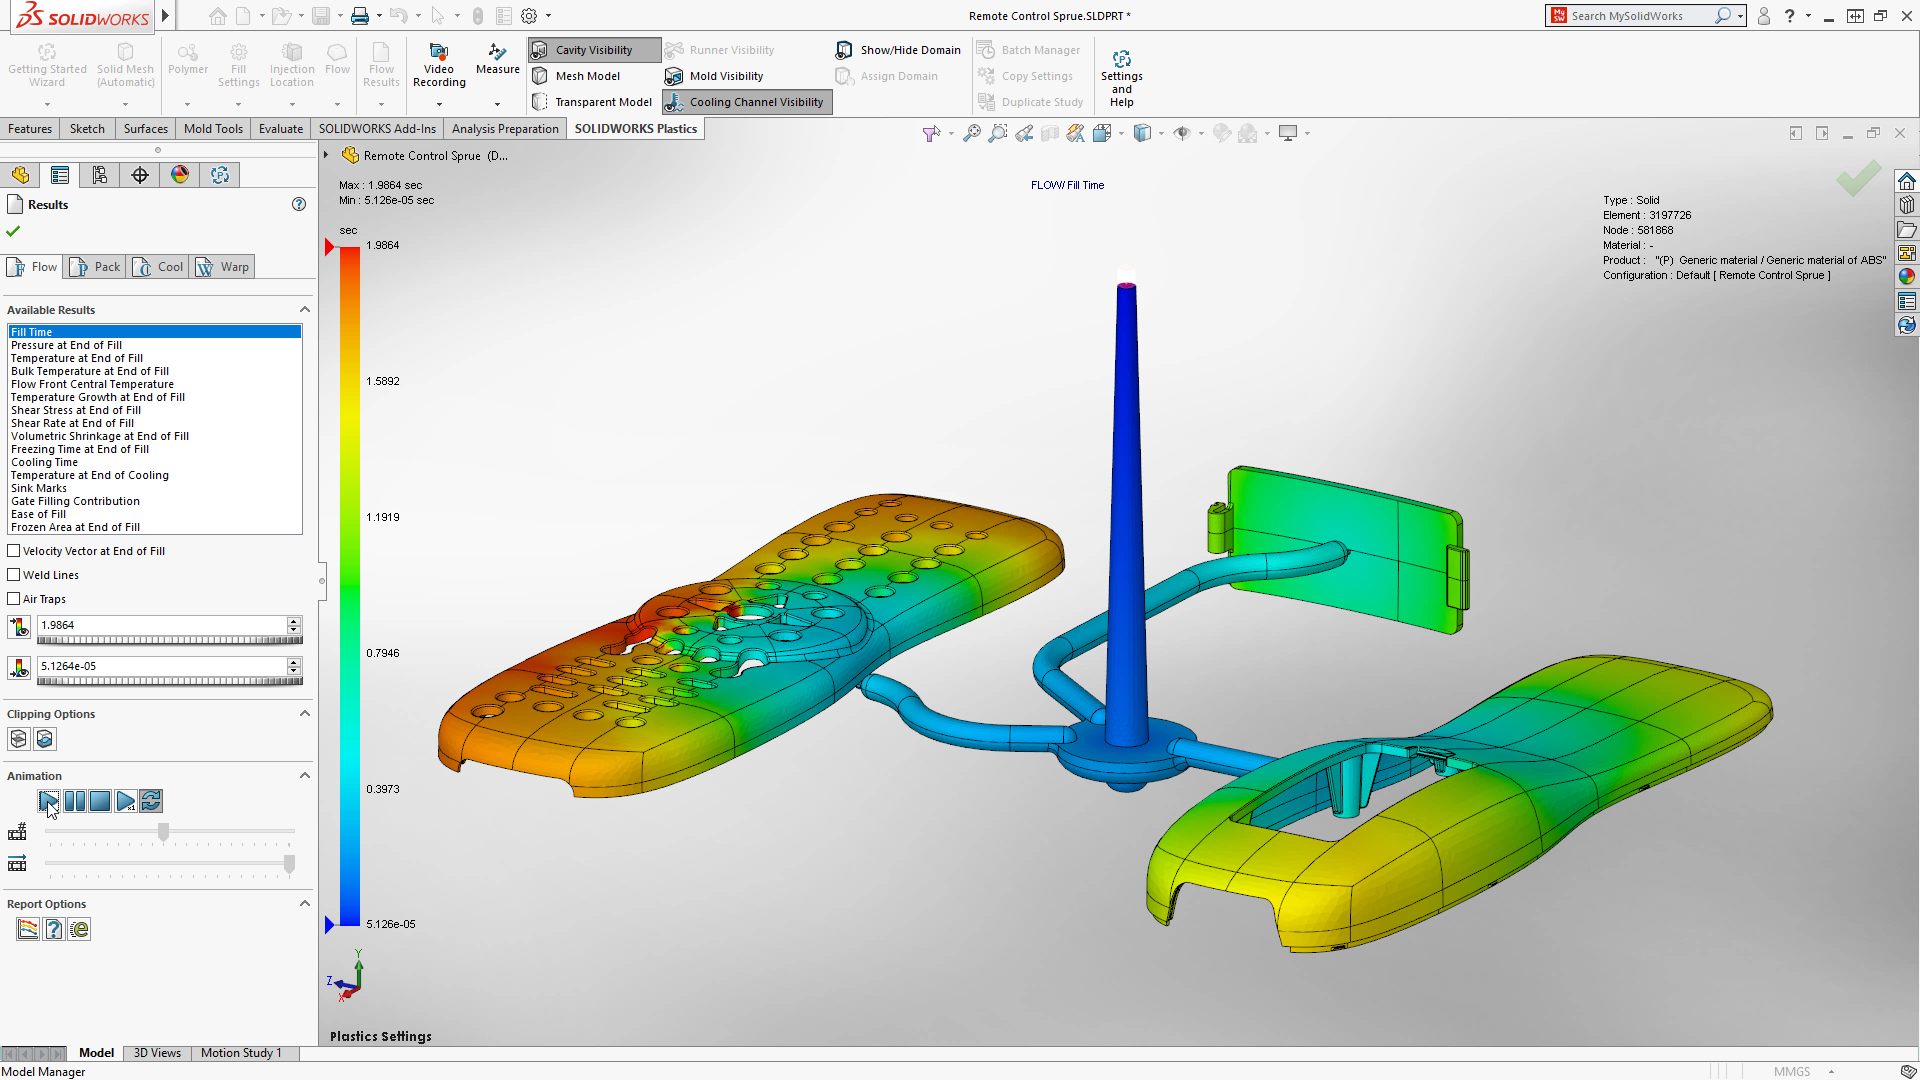 engineering analysis with solidworks simulation 2014 pdf download free